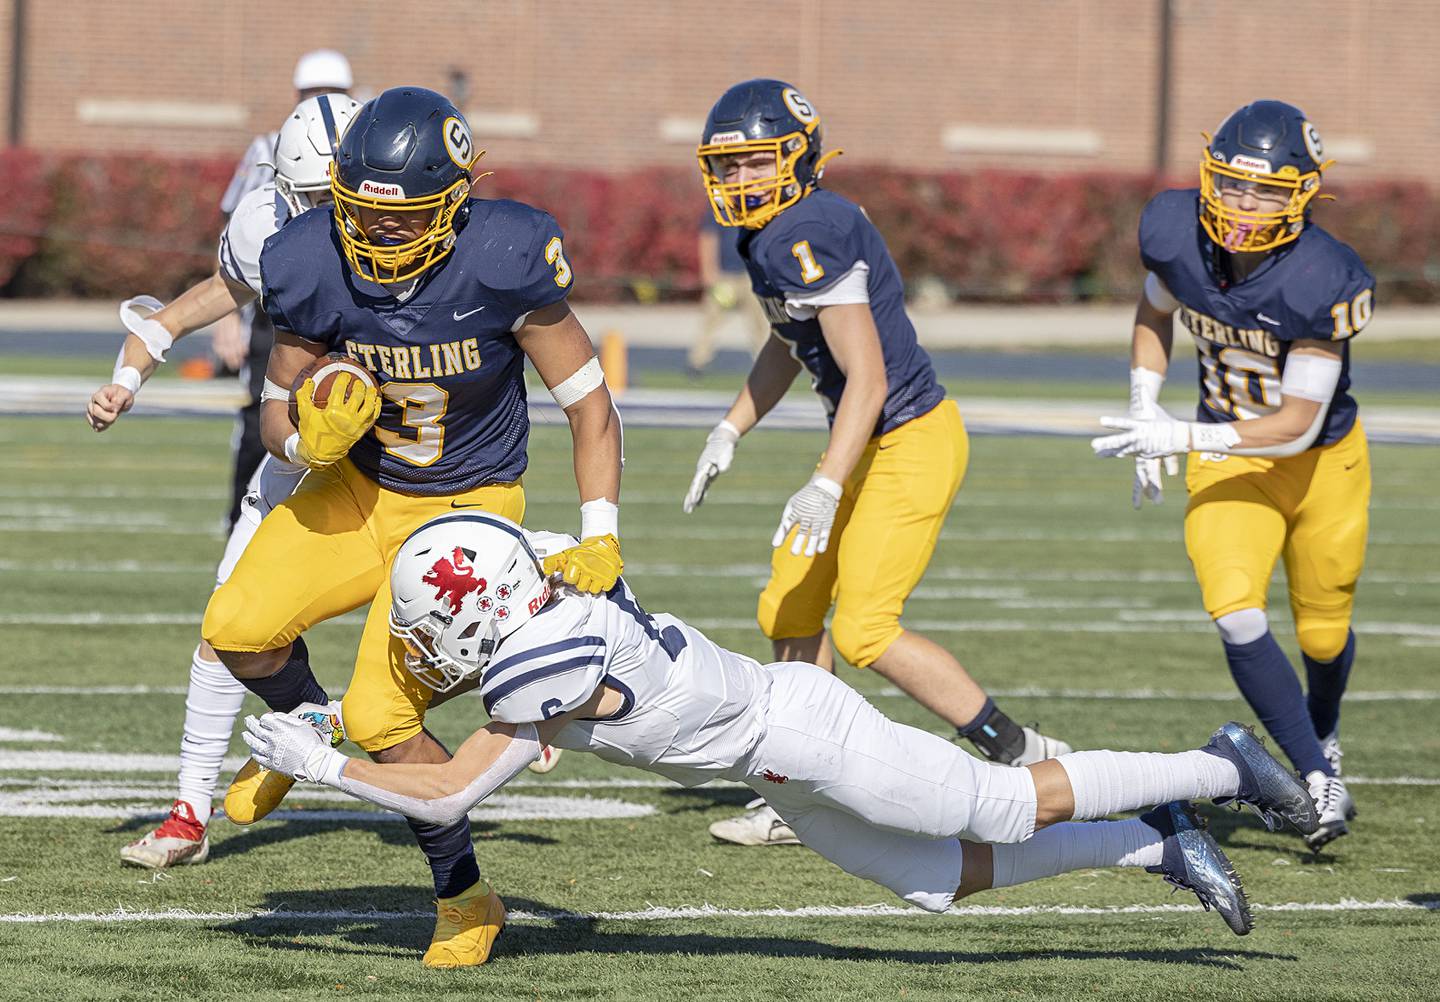 Sterling’s Antonio Tablante is tackled by St. Viator’s Driese Raap in their first round playoff game Saturday, Oct. 29, 2022.